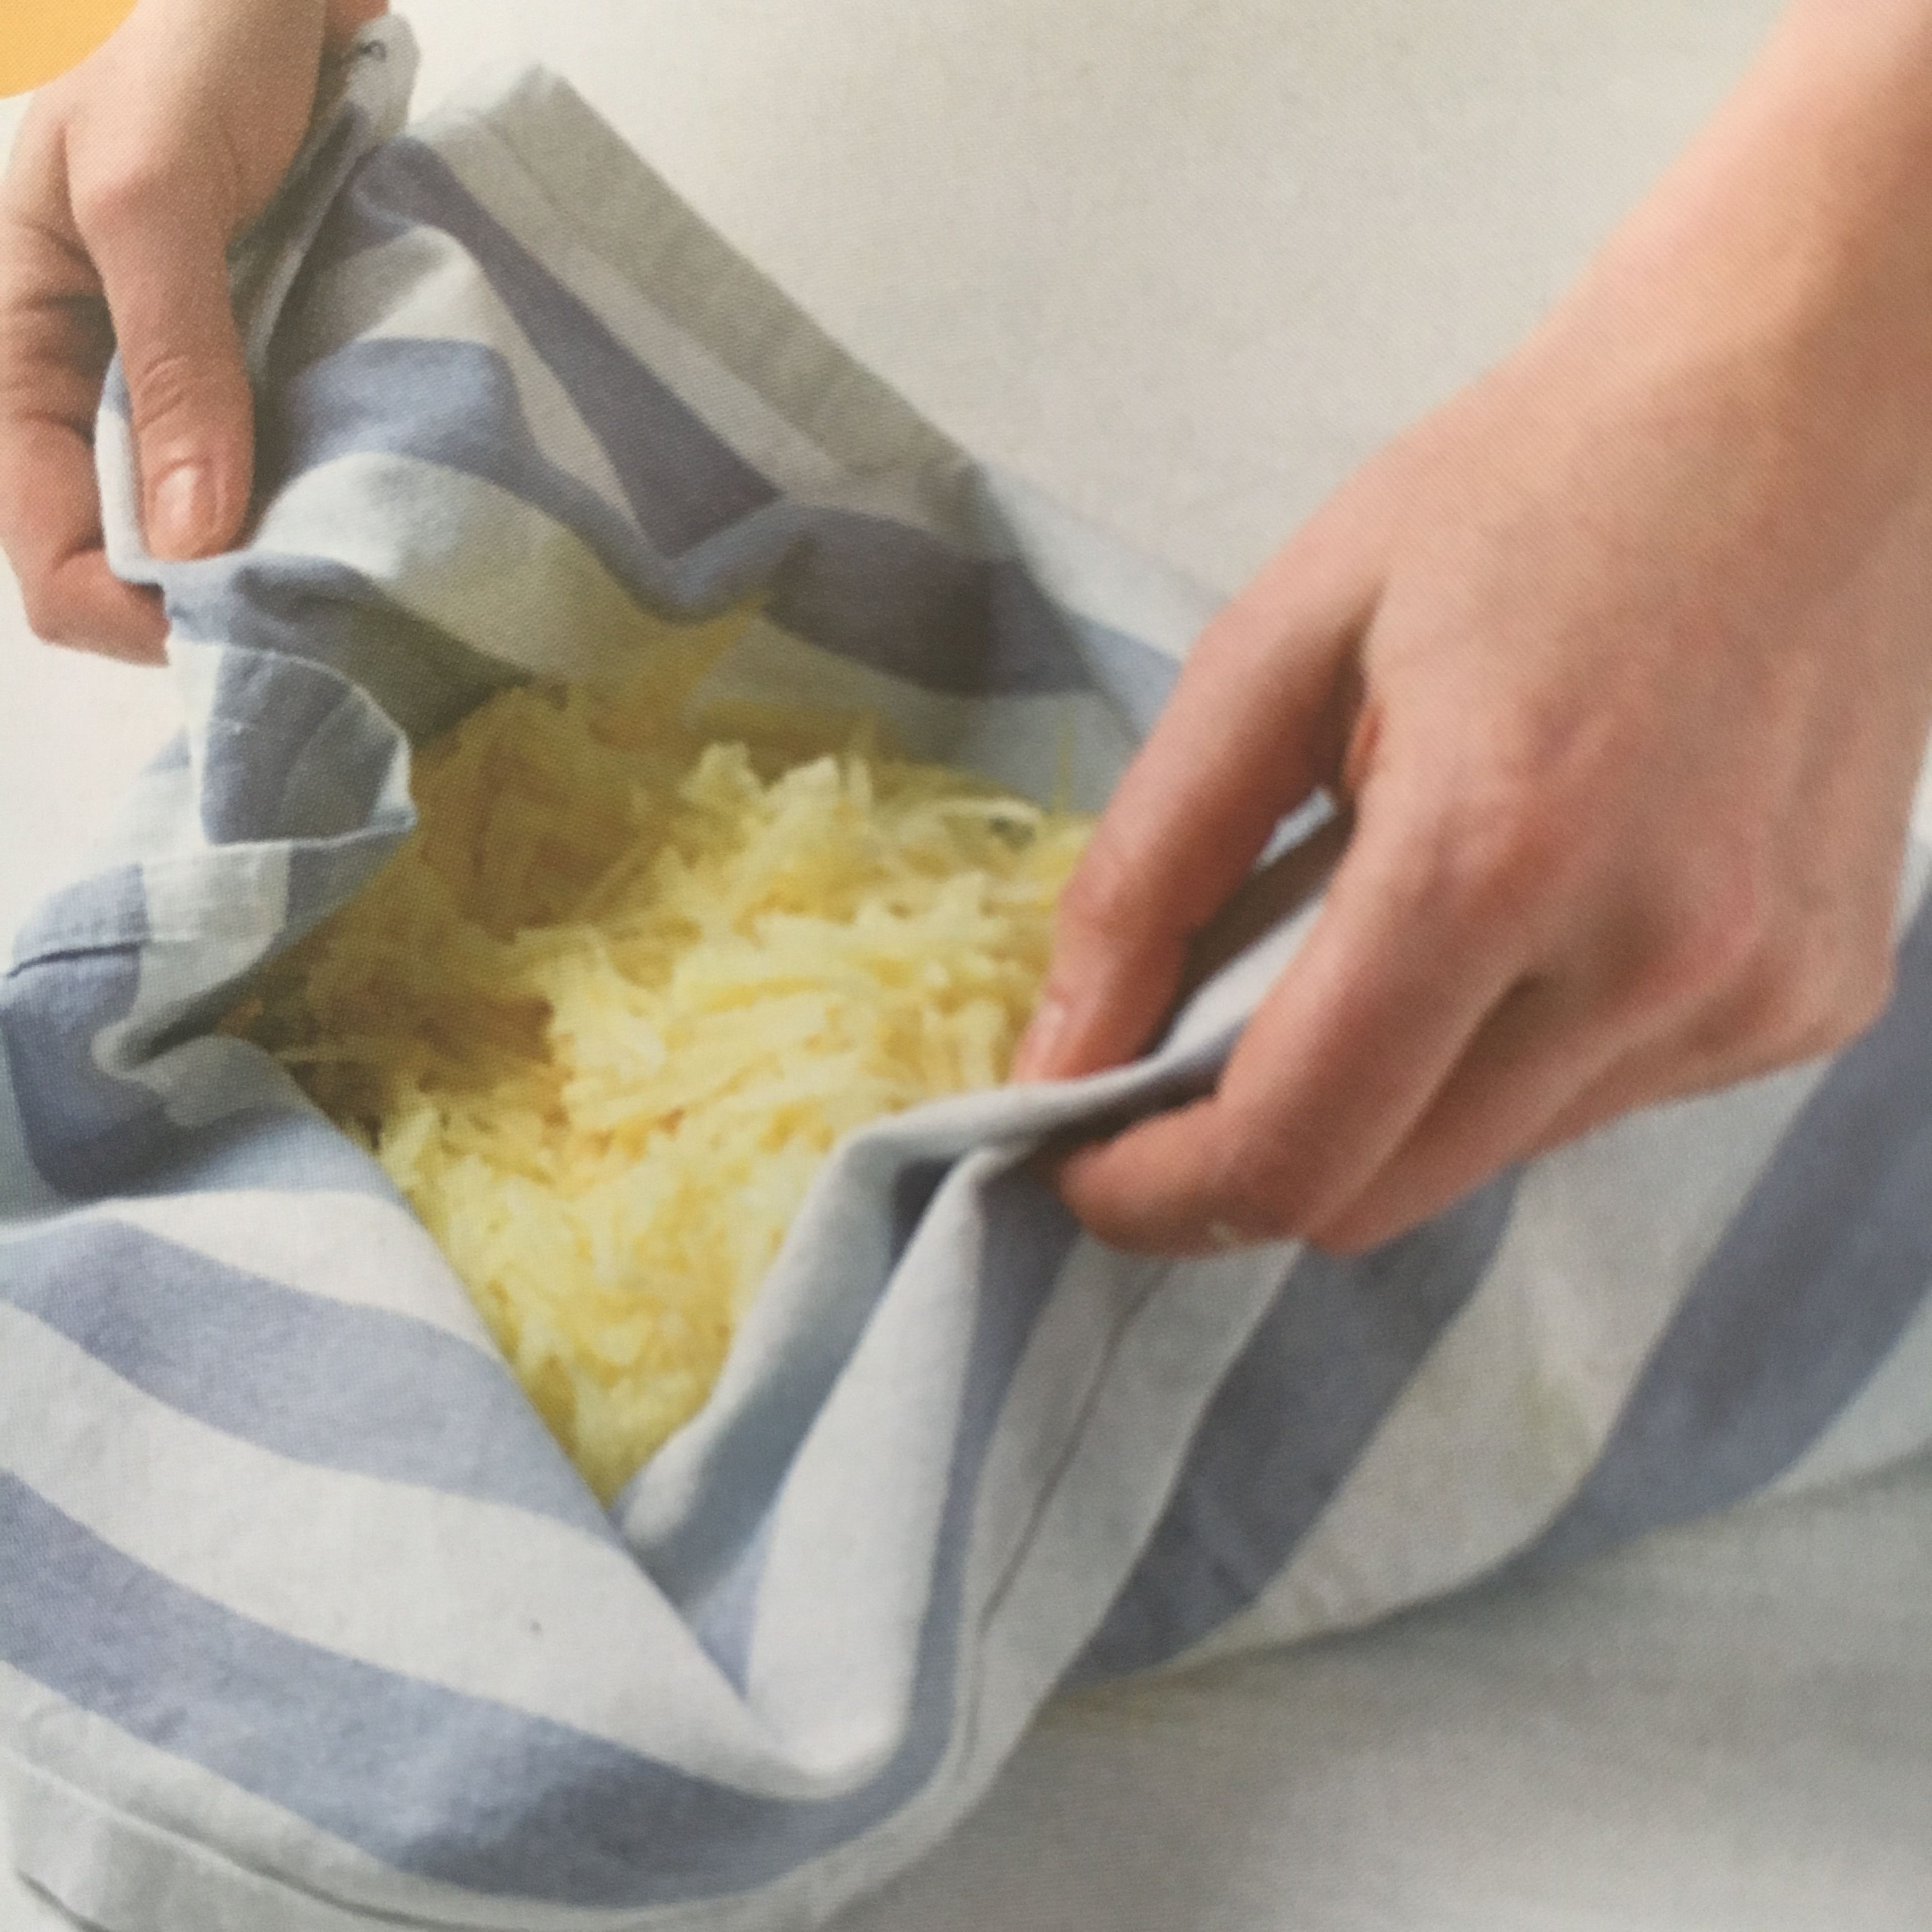 Use the tea towel to squeeze out any extra liquid which would make the rösti soggy. Add to the salt and pepper and mix lightly with a fork